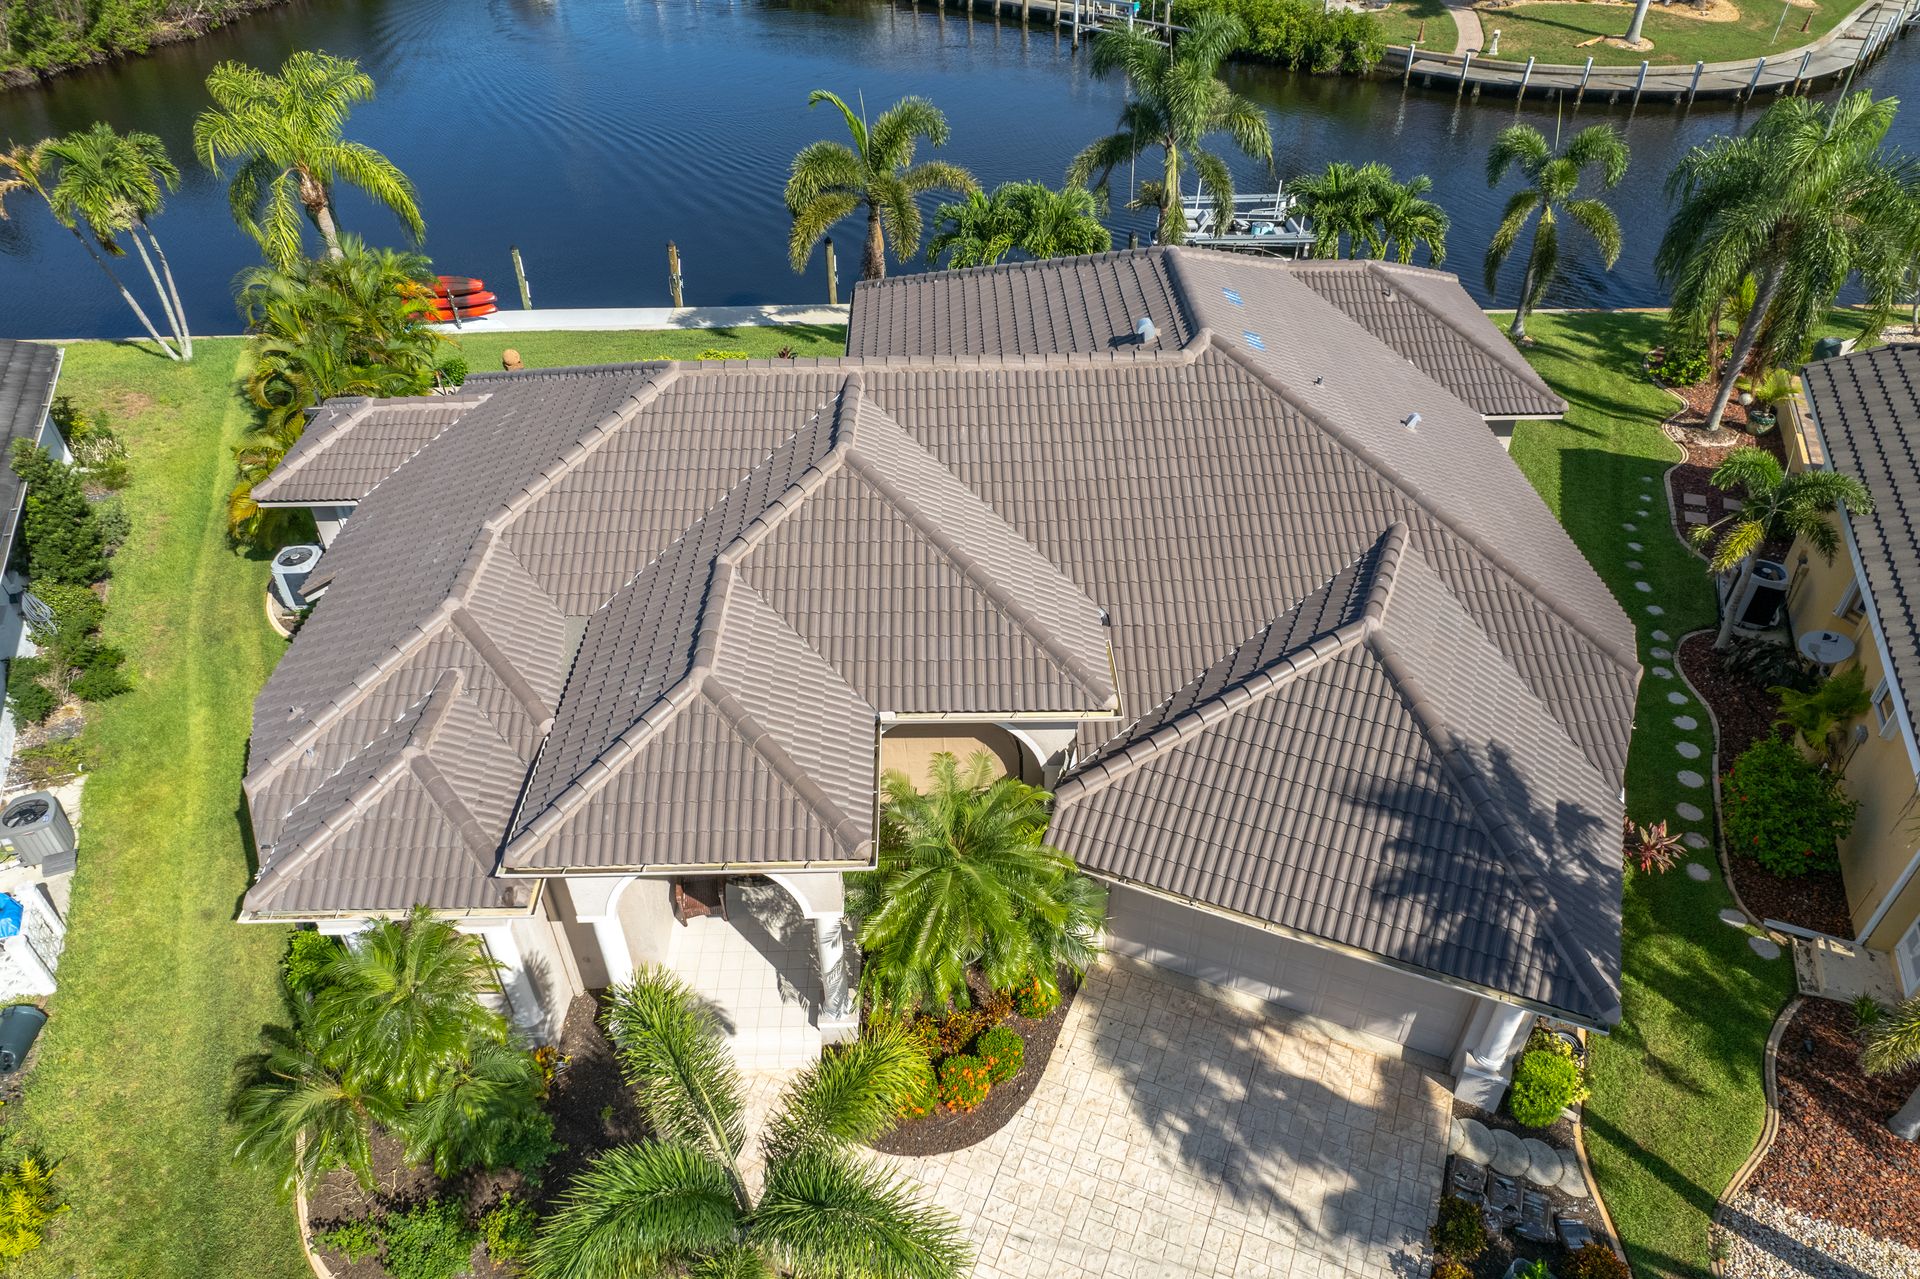 APC-Roofing-in-Florida-New-Tile-Roof